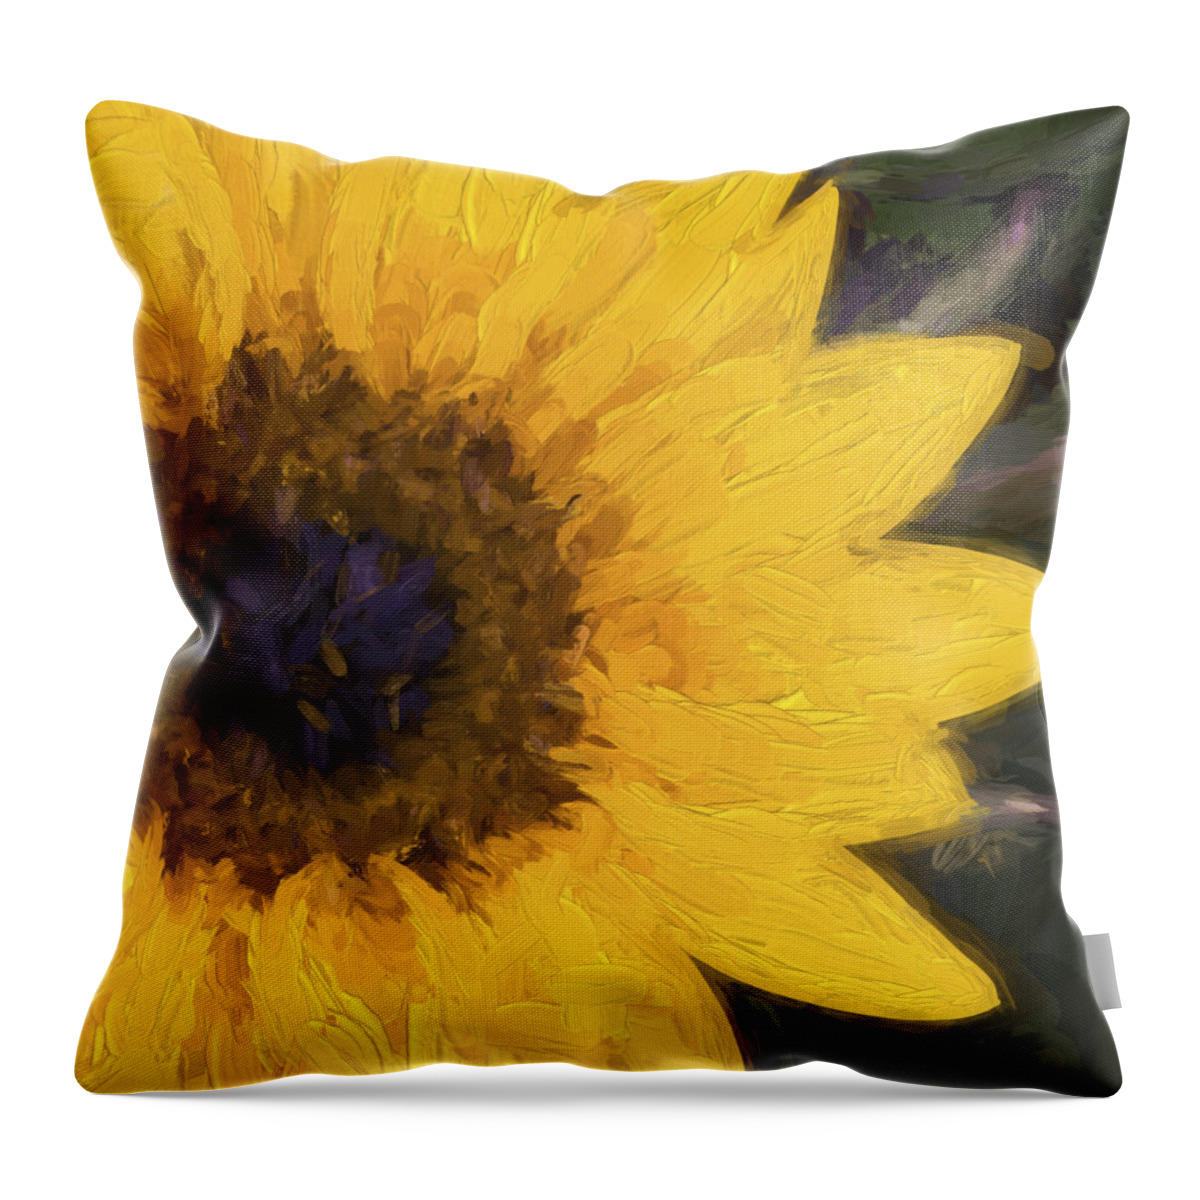 Yellow Throw Pillow featuring the digital art Yellow Sunflower Painterly #2 by Carol Leigh